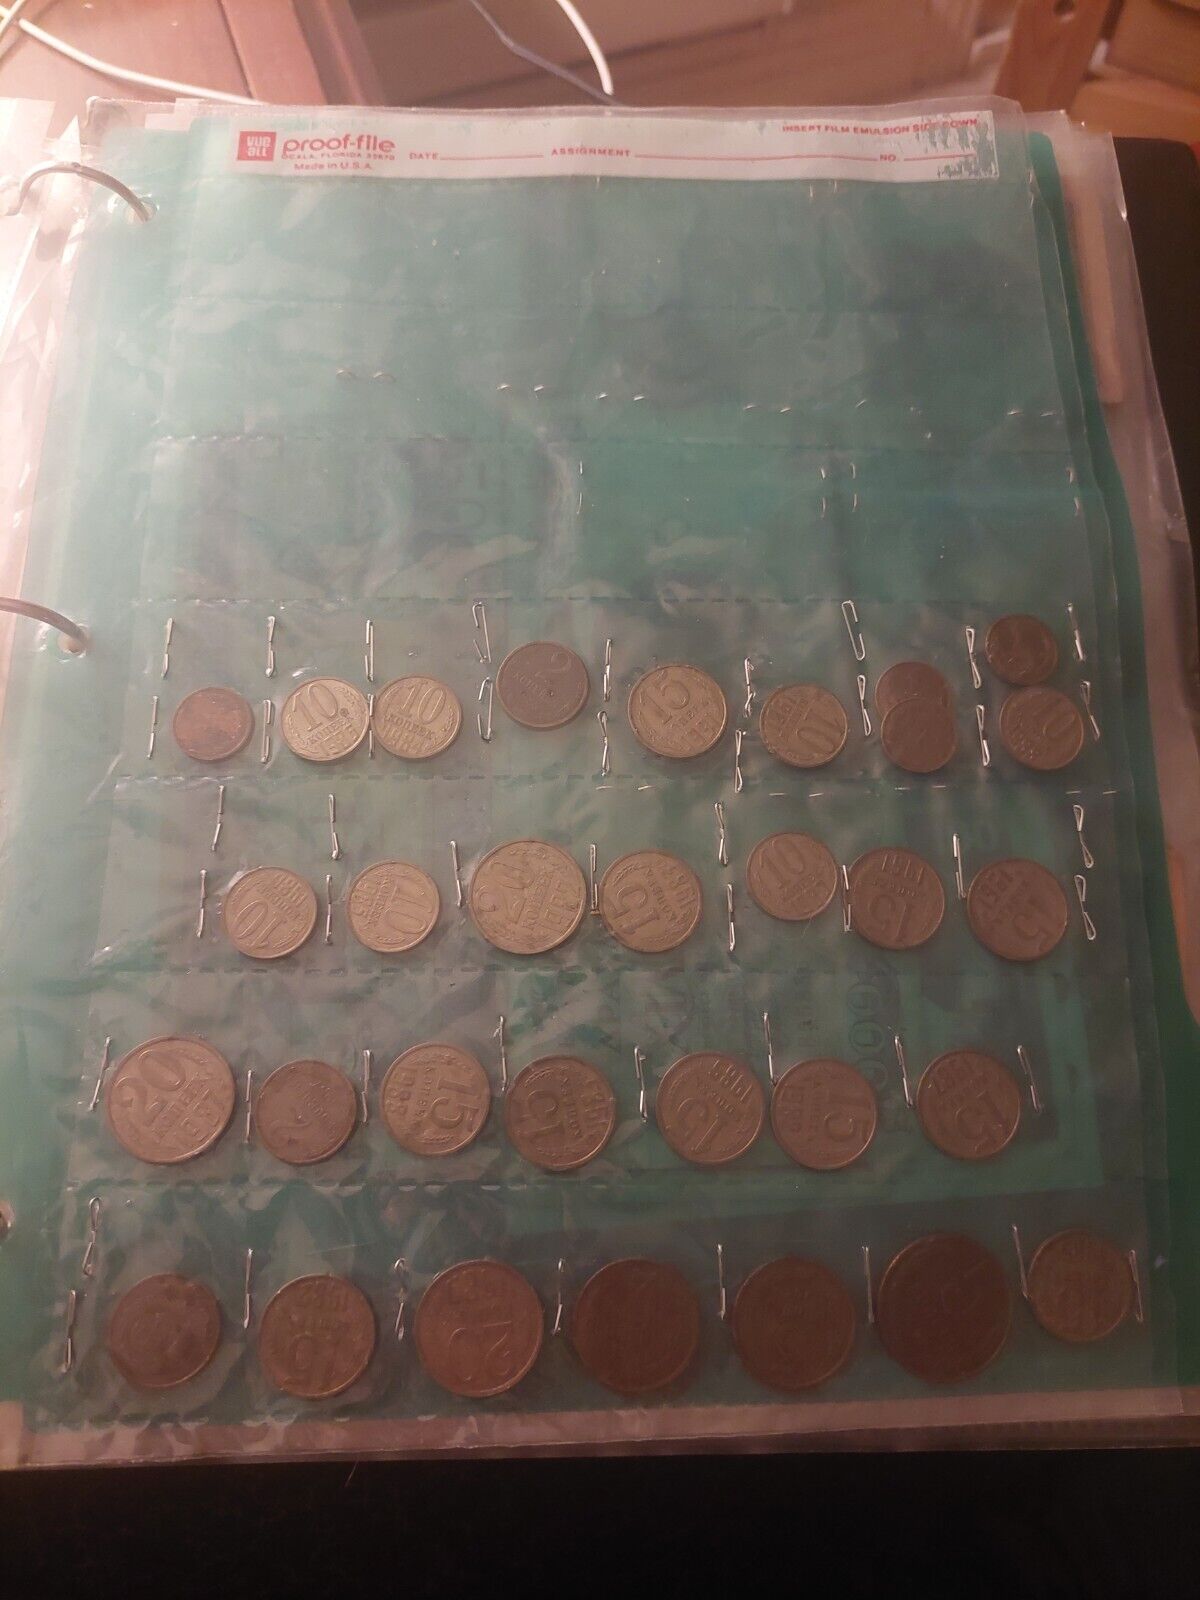 Coin collection lot